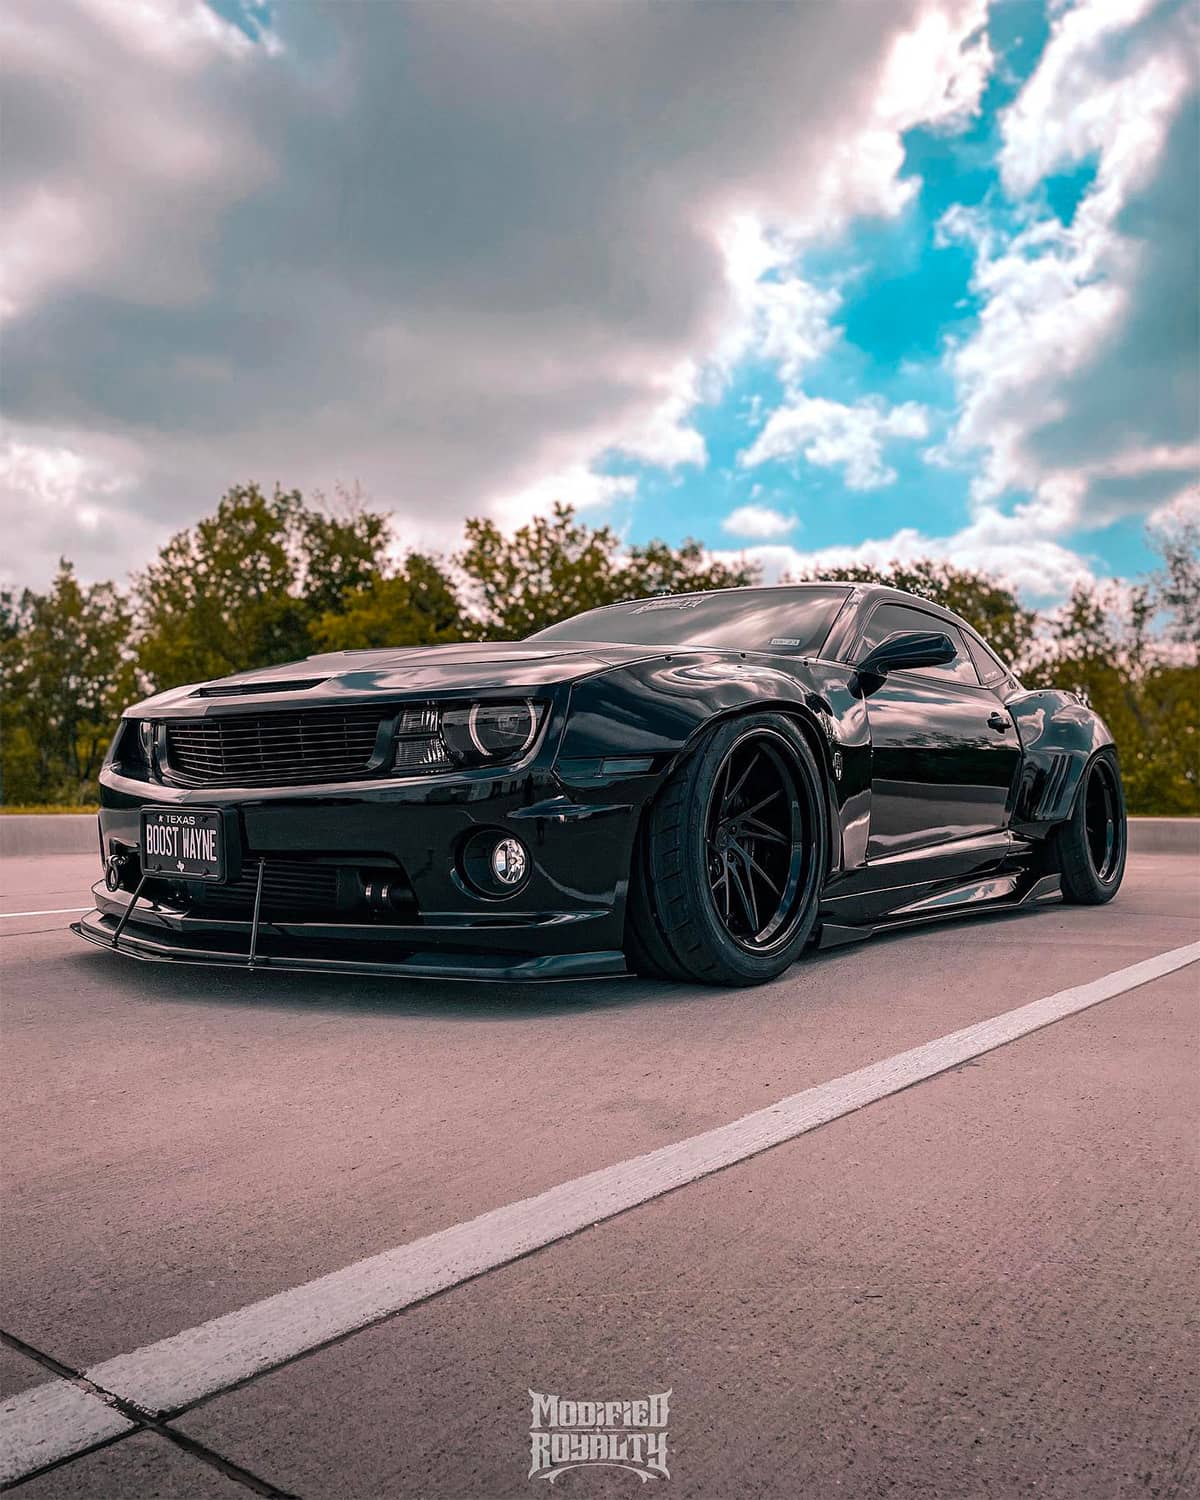 This wide-body Camaro SS sits on a set of wide Vorsteiner VFN-312 rims sized 20×10 front and 20×11 rear, wrapped in Nitto NT05R tires sized 275/40/20 and 315/35/20 accordingly.